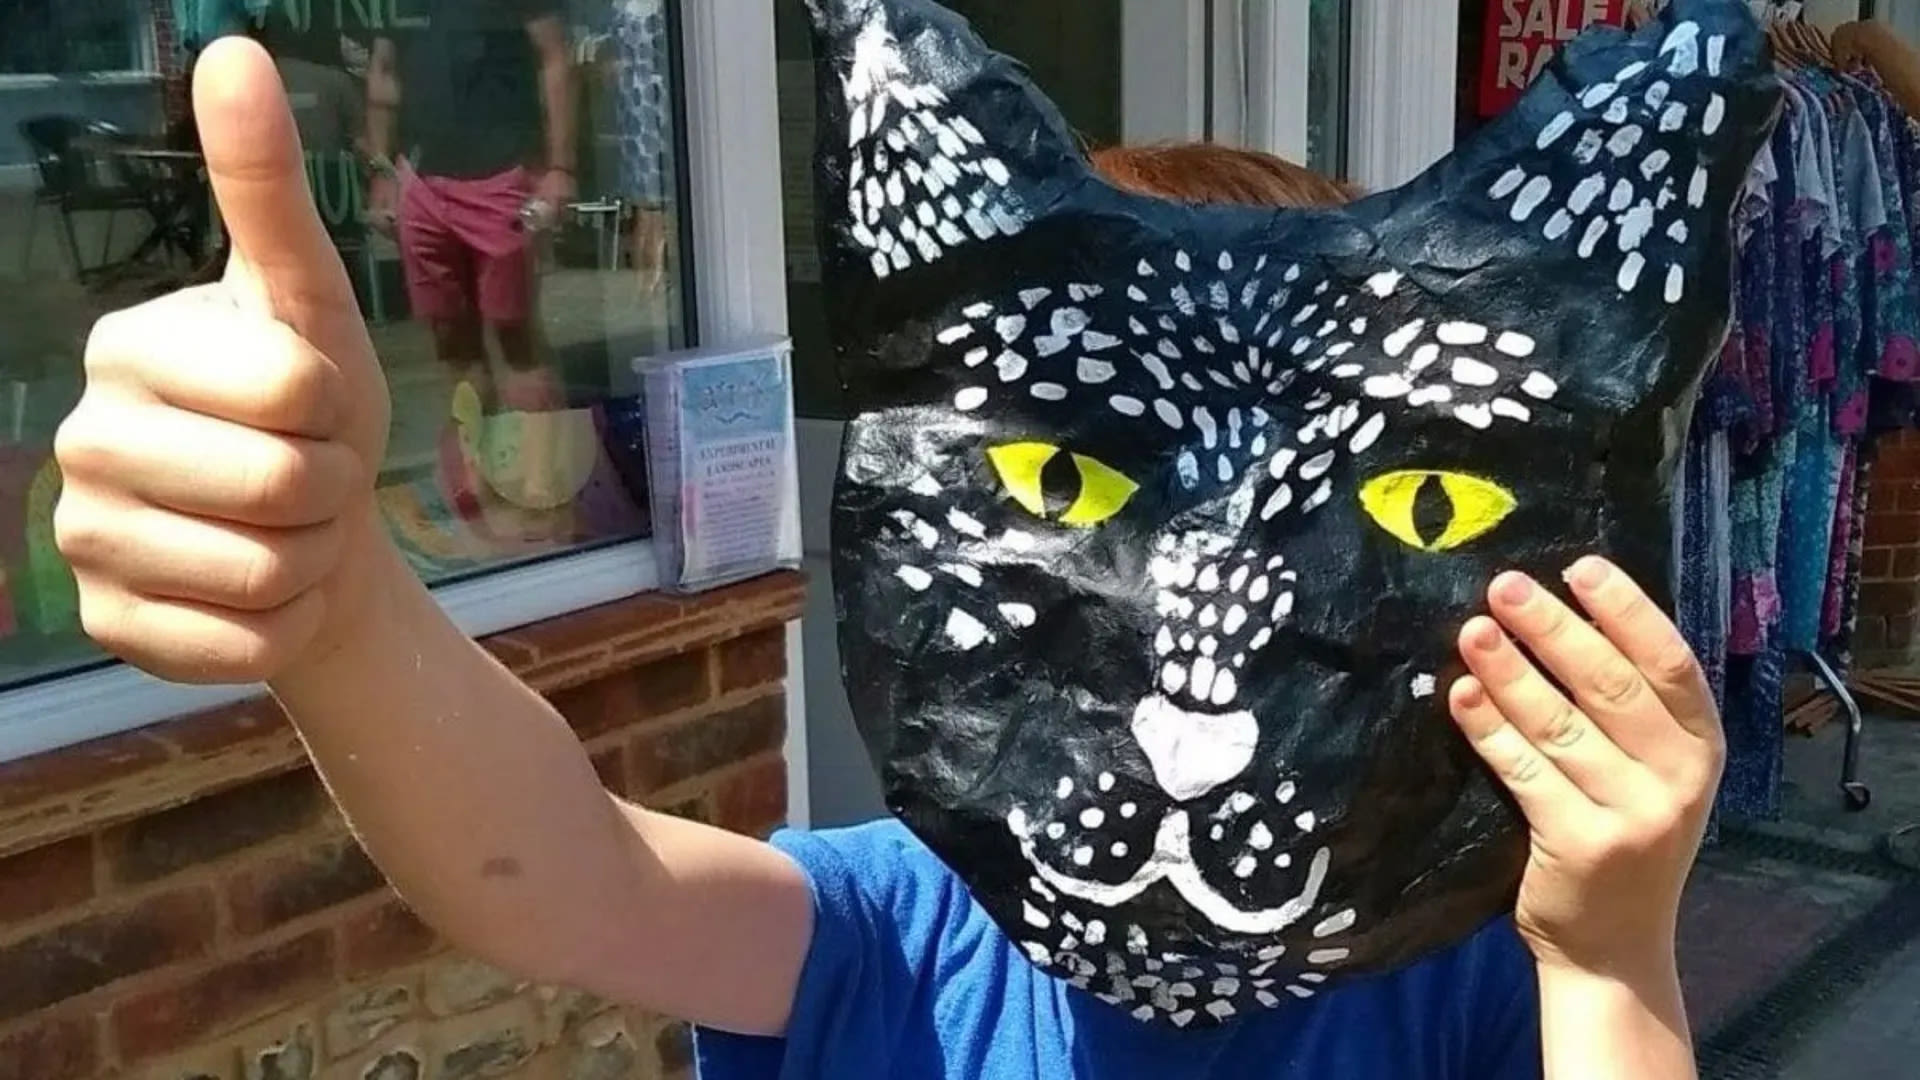 A child giving a thumbs up while holding a cat mask they have made up to their face